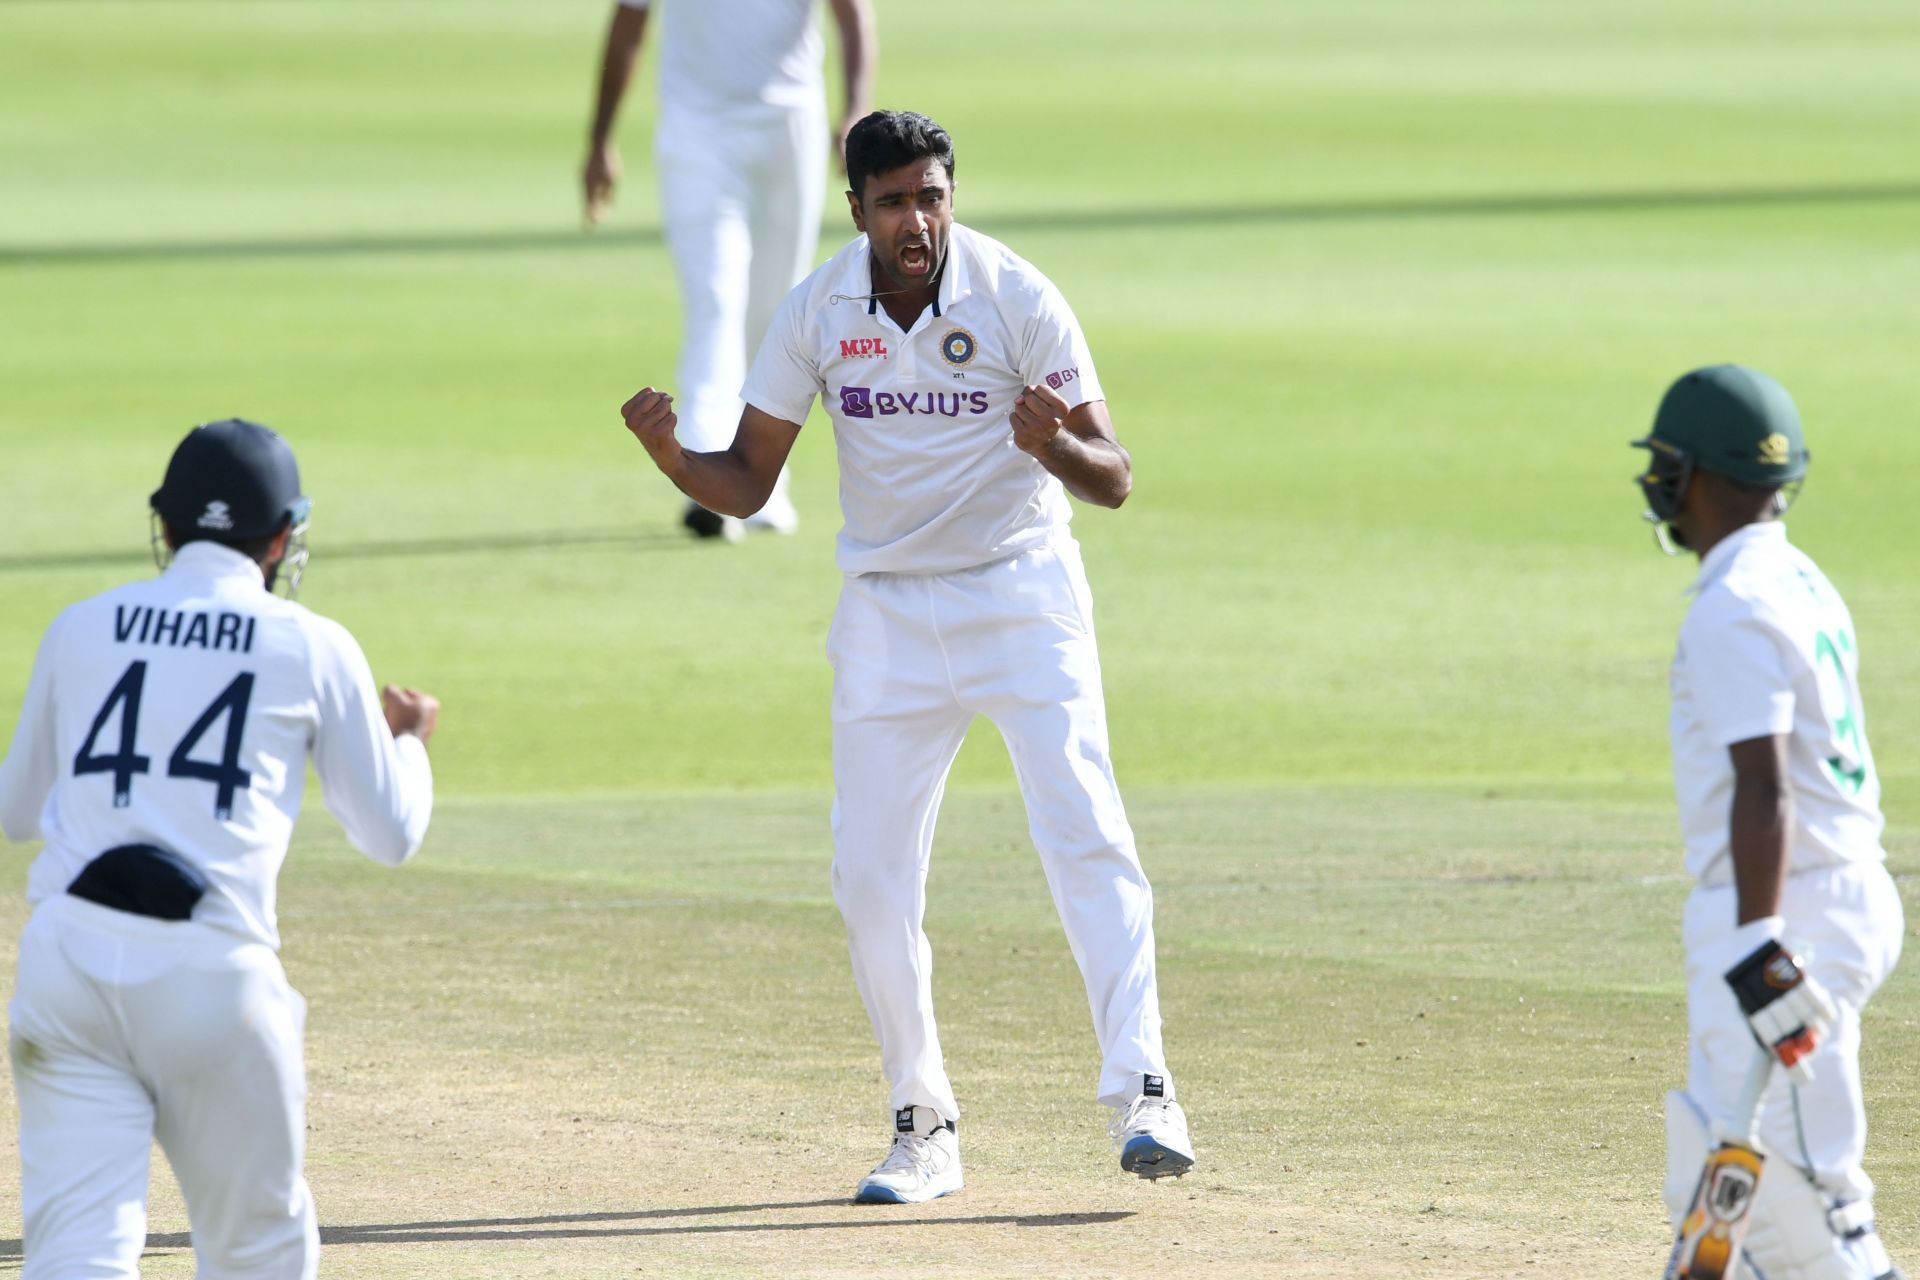 2nd Test: South Africa v India - Day 3 (Image: Getty)